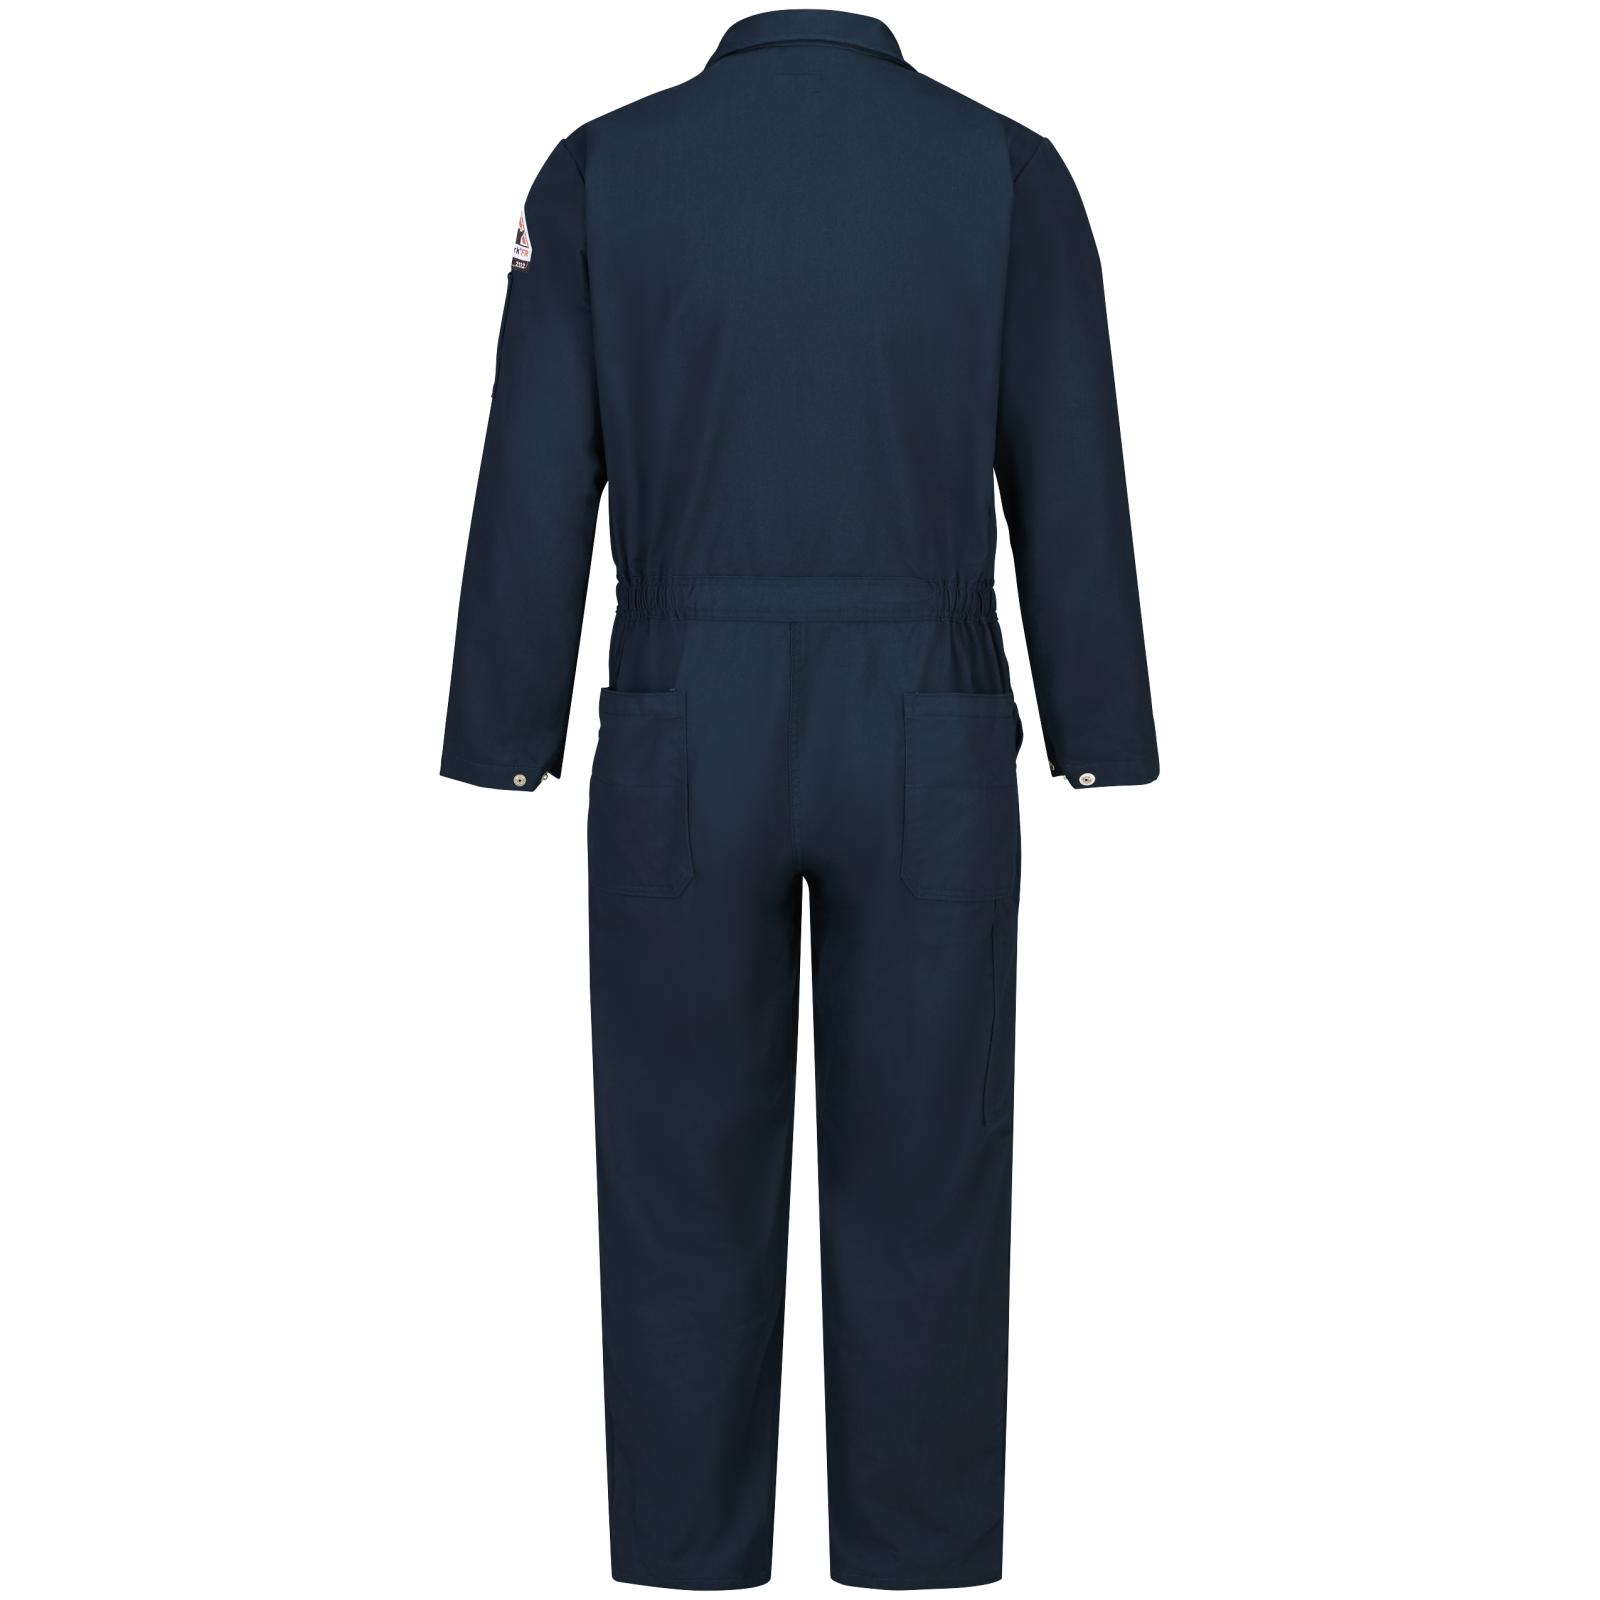 Men's Midweight Nomex FR Premium Coverall| Bulwark US